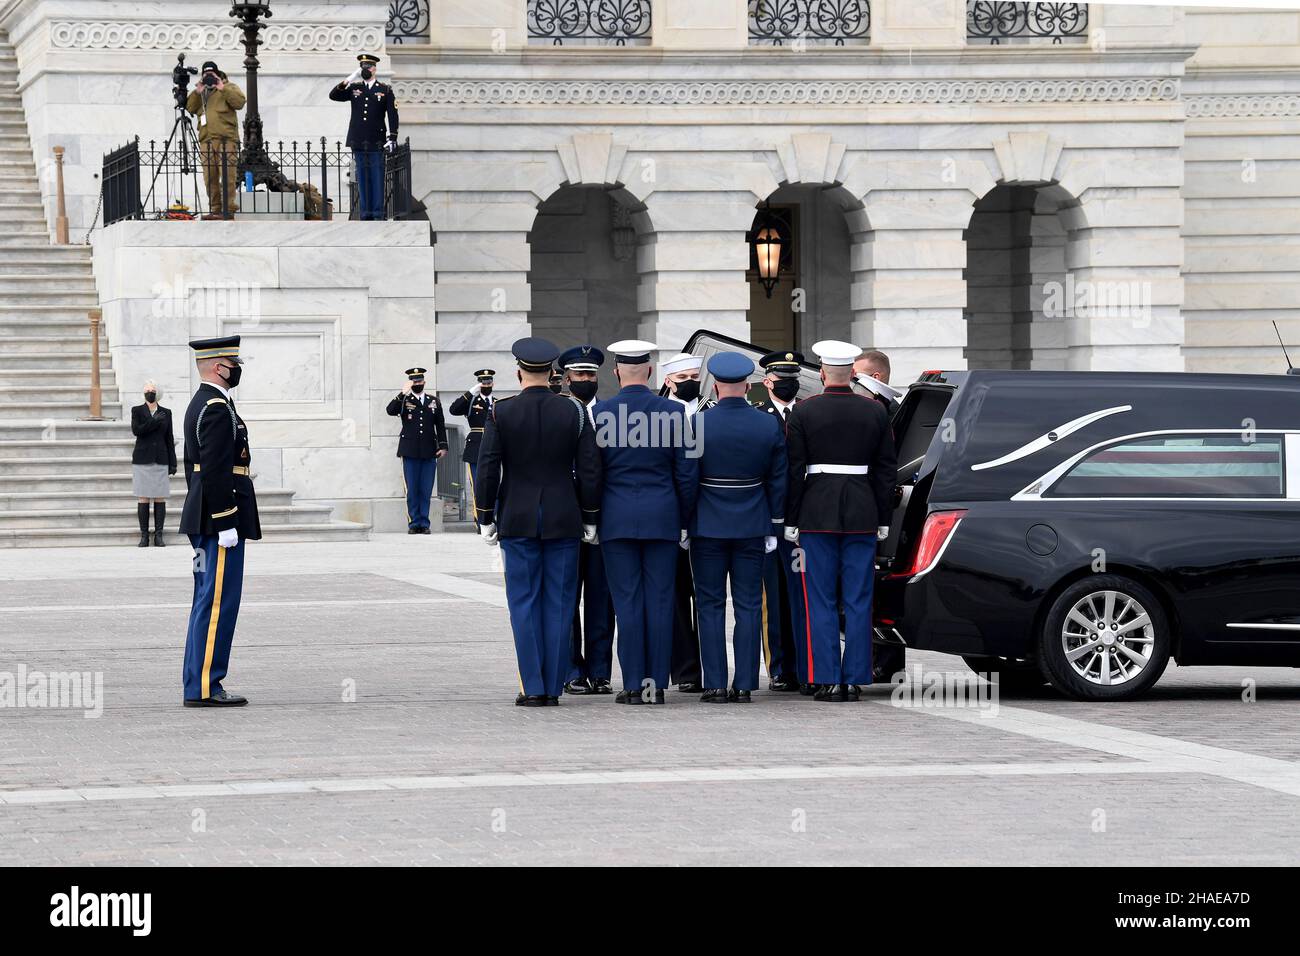 Washington, United States Of America. 10th Dec, 2021. Washington, United States of America. 10 December, 2021. An Armed Forces honor guard place the flag-draped casket of World War II veteran and former Senator Robert Dole into a hearse outside the U.S. Capitol, December 10, 2021 in Washington, DC Senator Dole died at age 98 following a lifetime of service to the nation. Credit: Leroy Council/U.S. Army/Alamy Live News Stock Photo